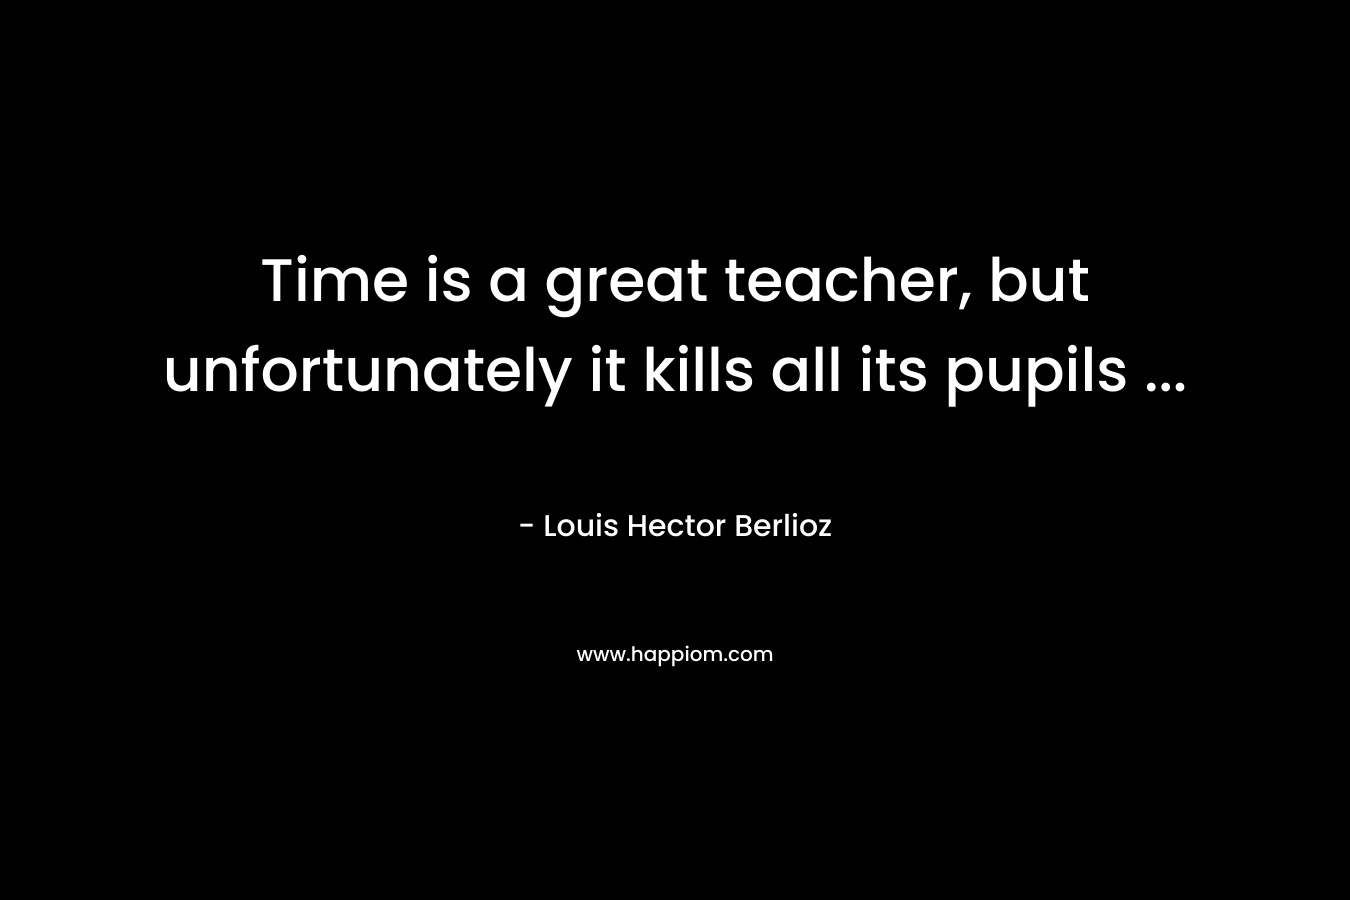 Time is a great teacher, but unfortunately it kills all its pupils ...